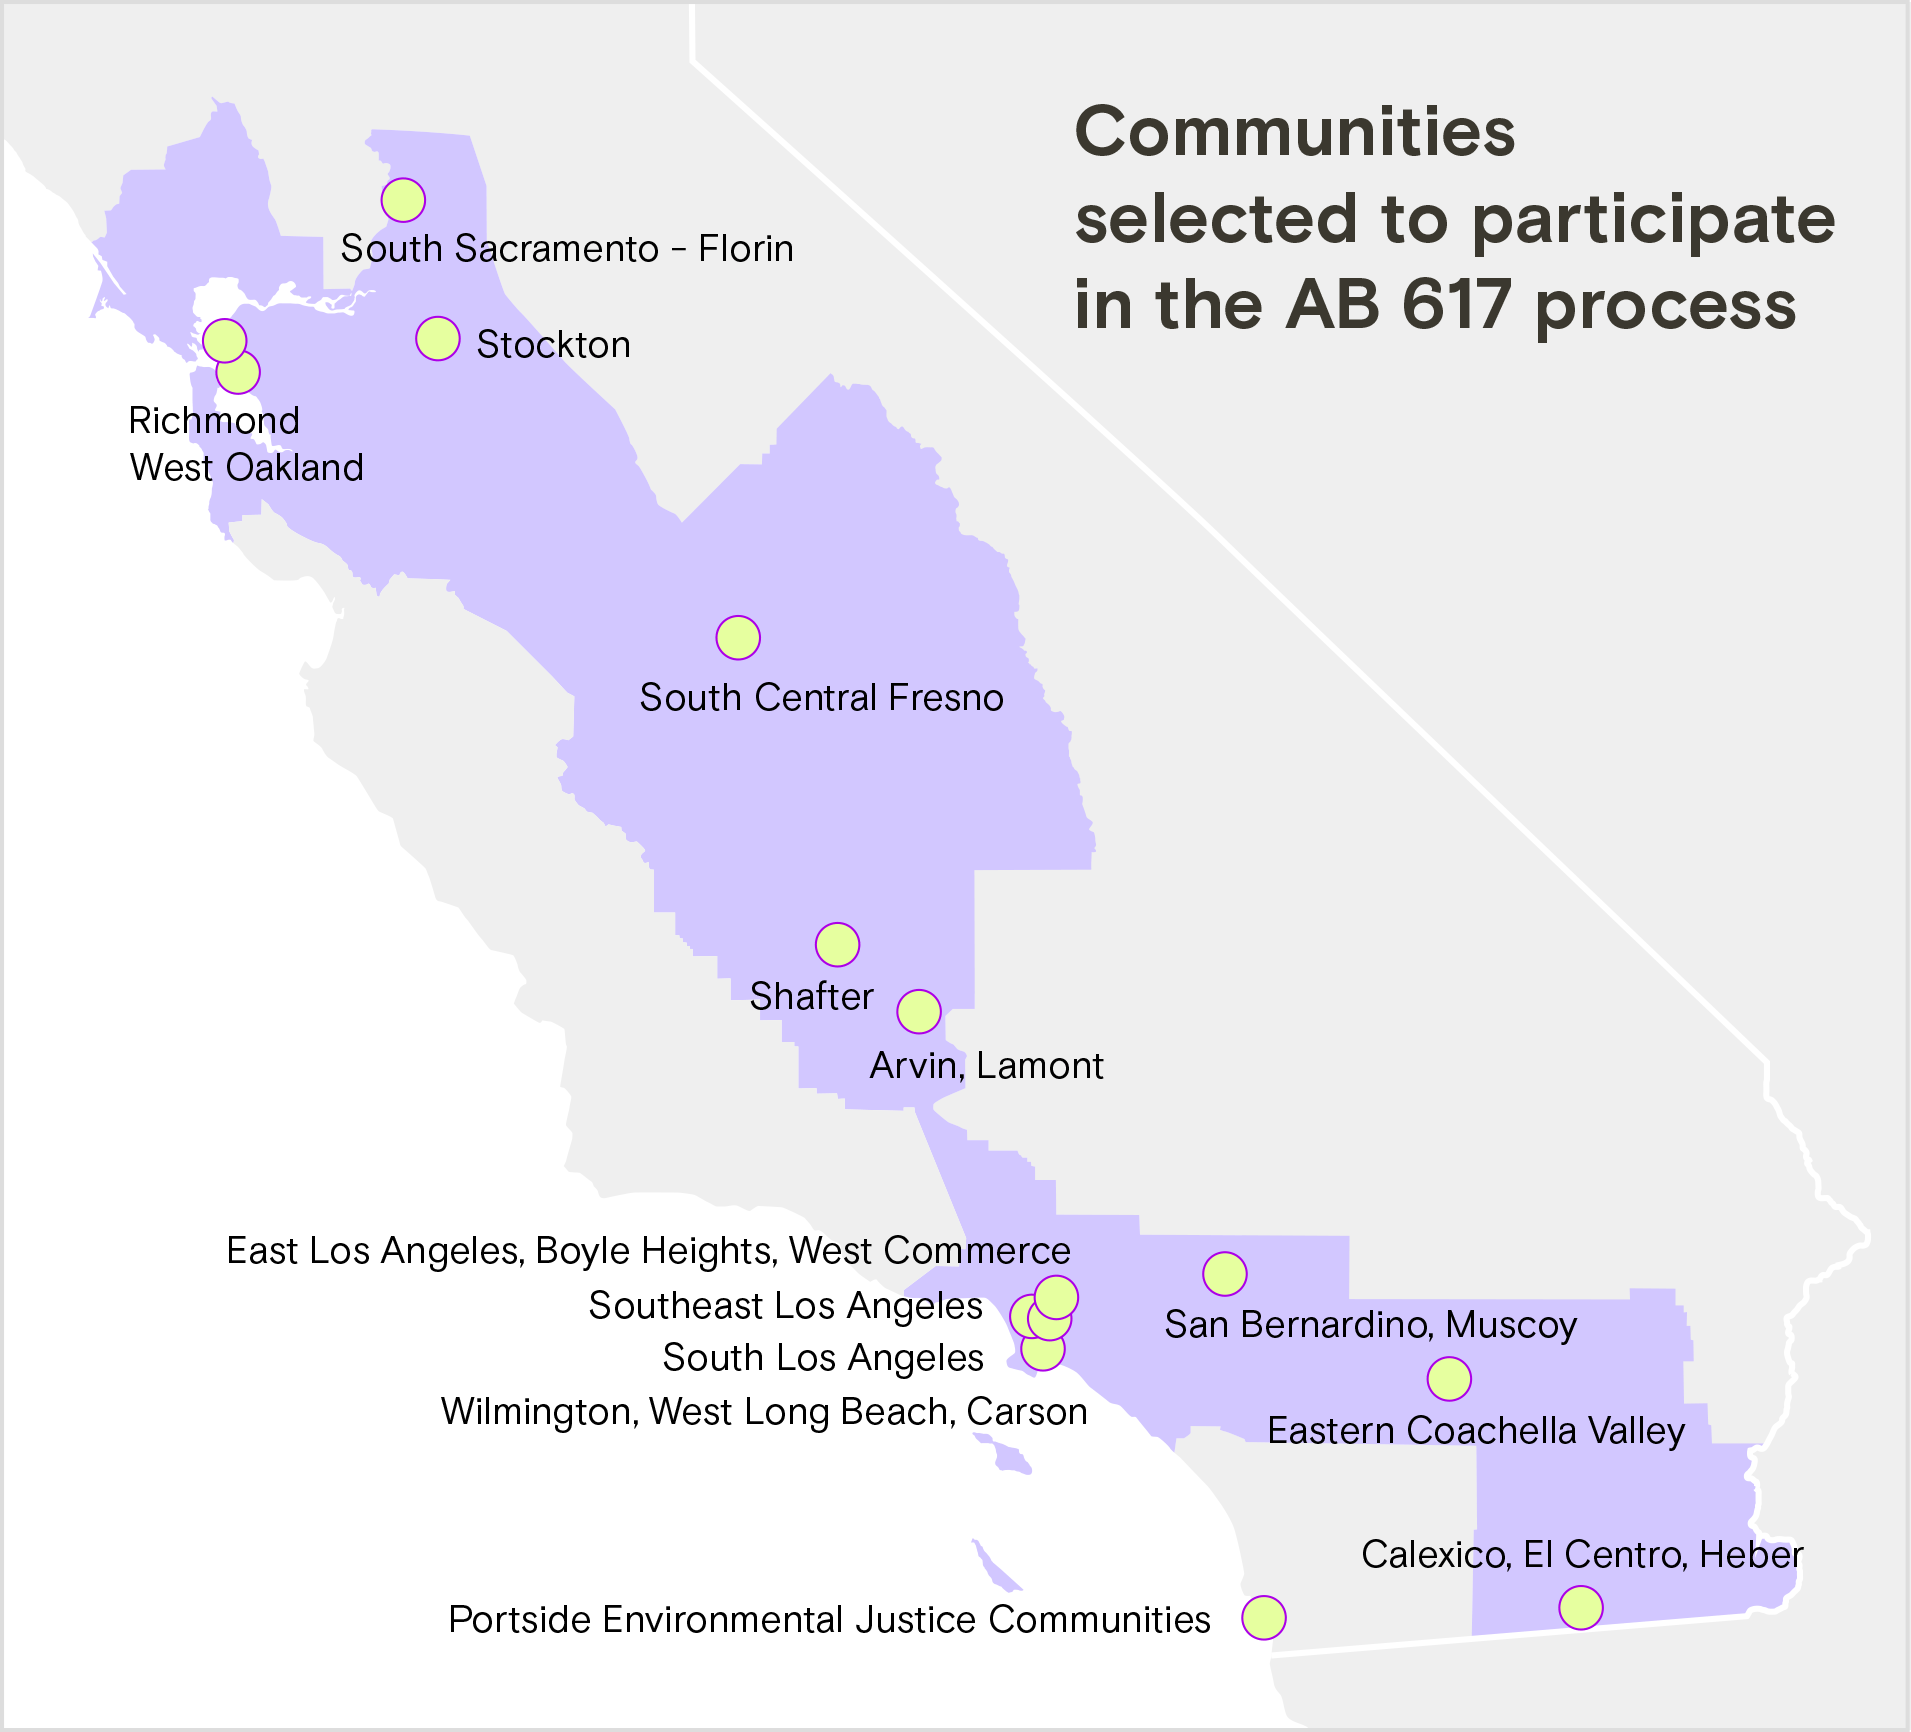 Communities selected to participate in the AB 617 process